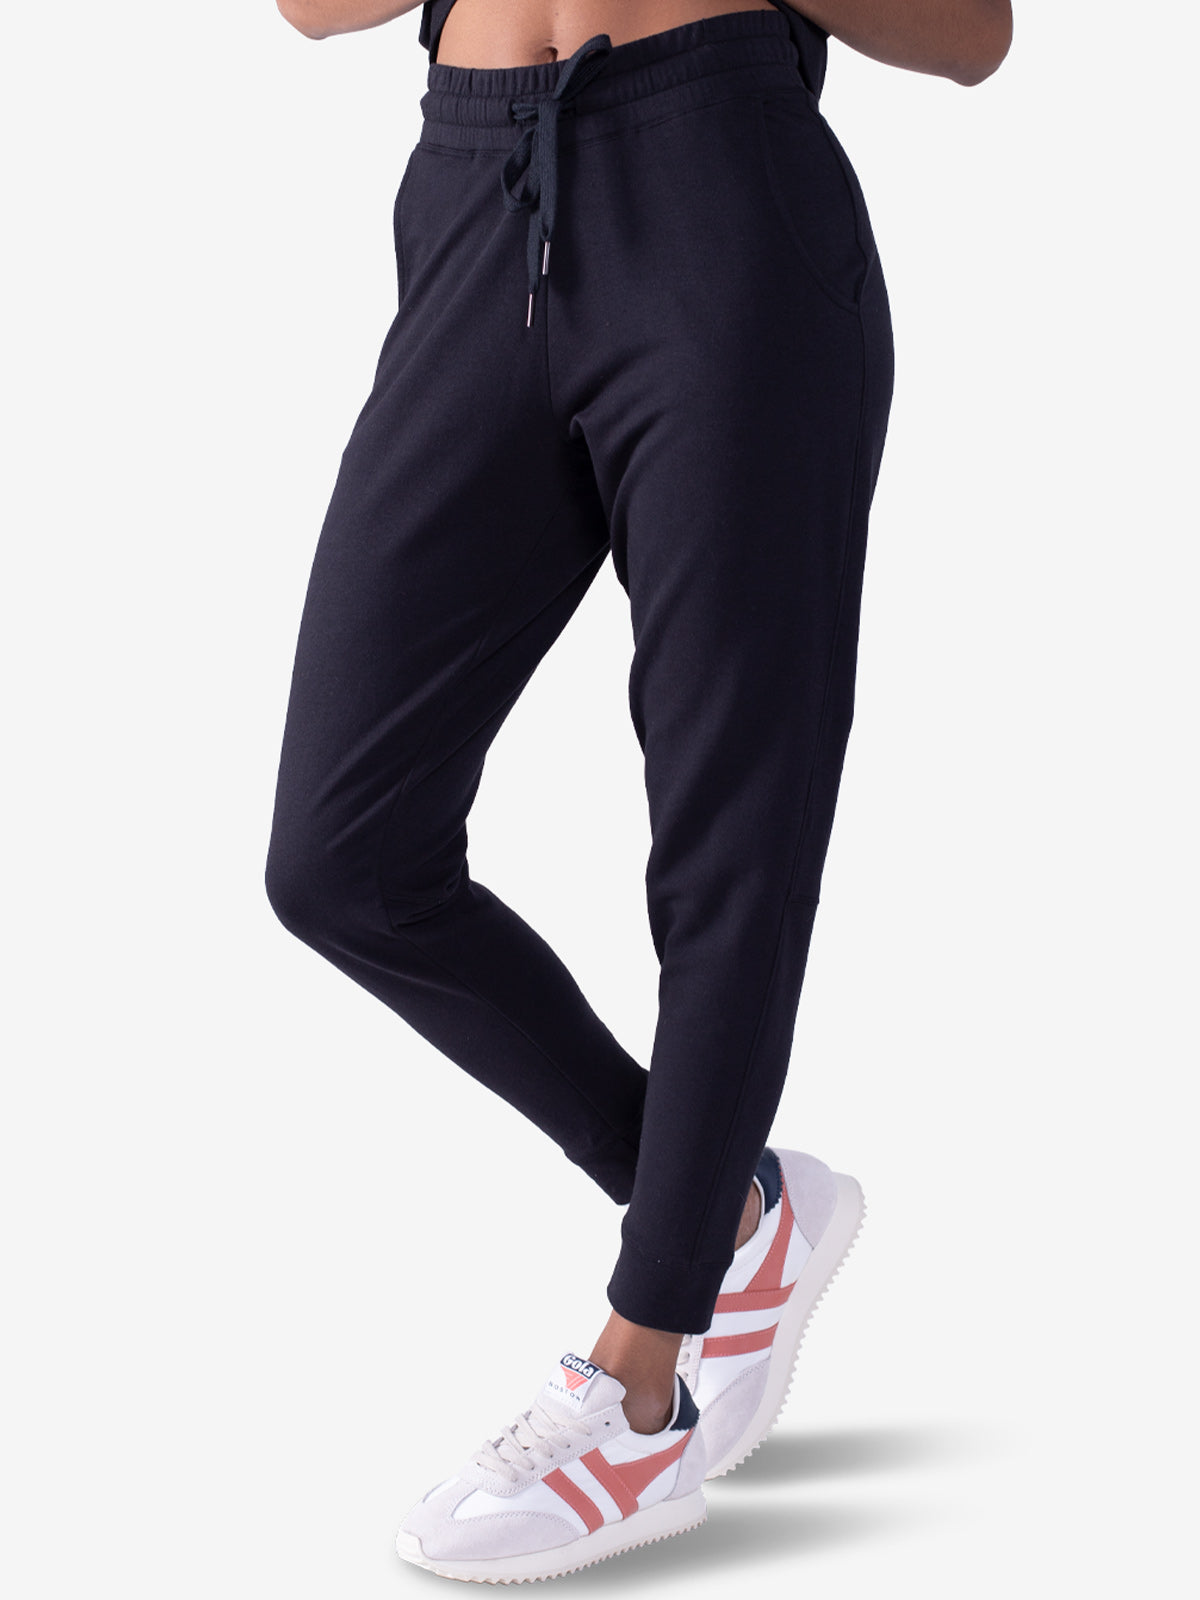 Best travel joggers for women in Singapore, Malaysia, Australia